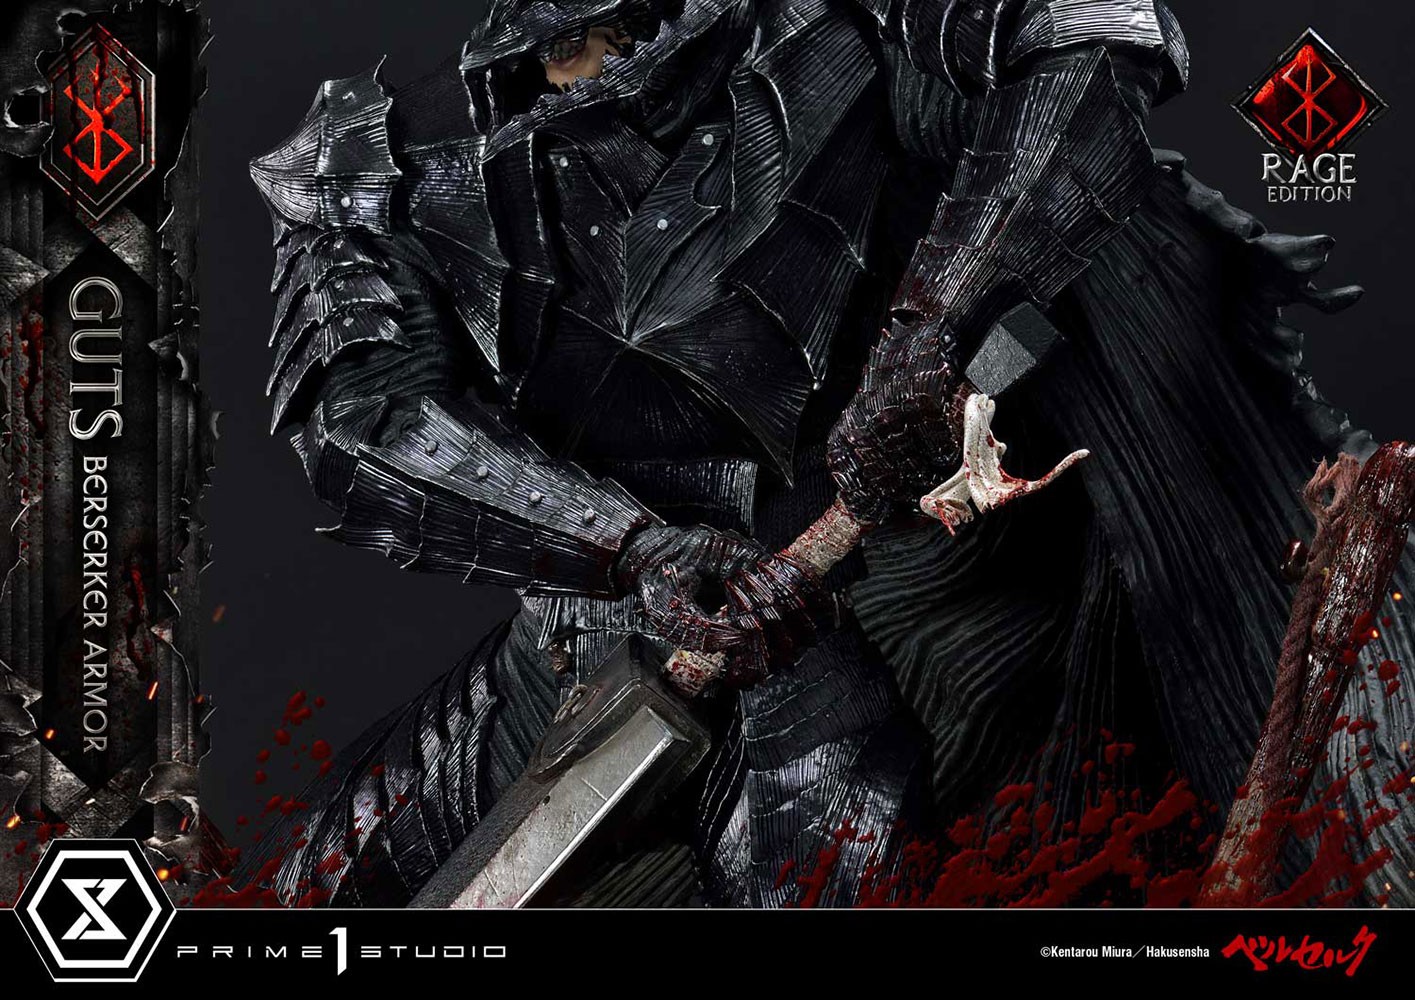 Guts Berserker Armor (Rage Edition) Collector Edition (Prototype Shown) View 4